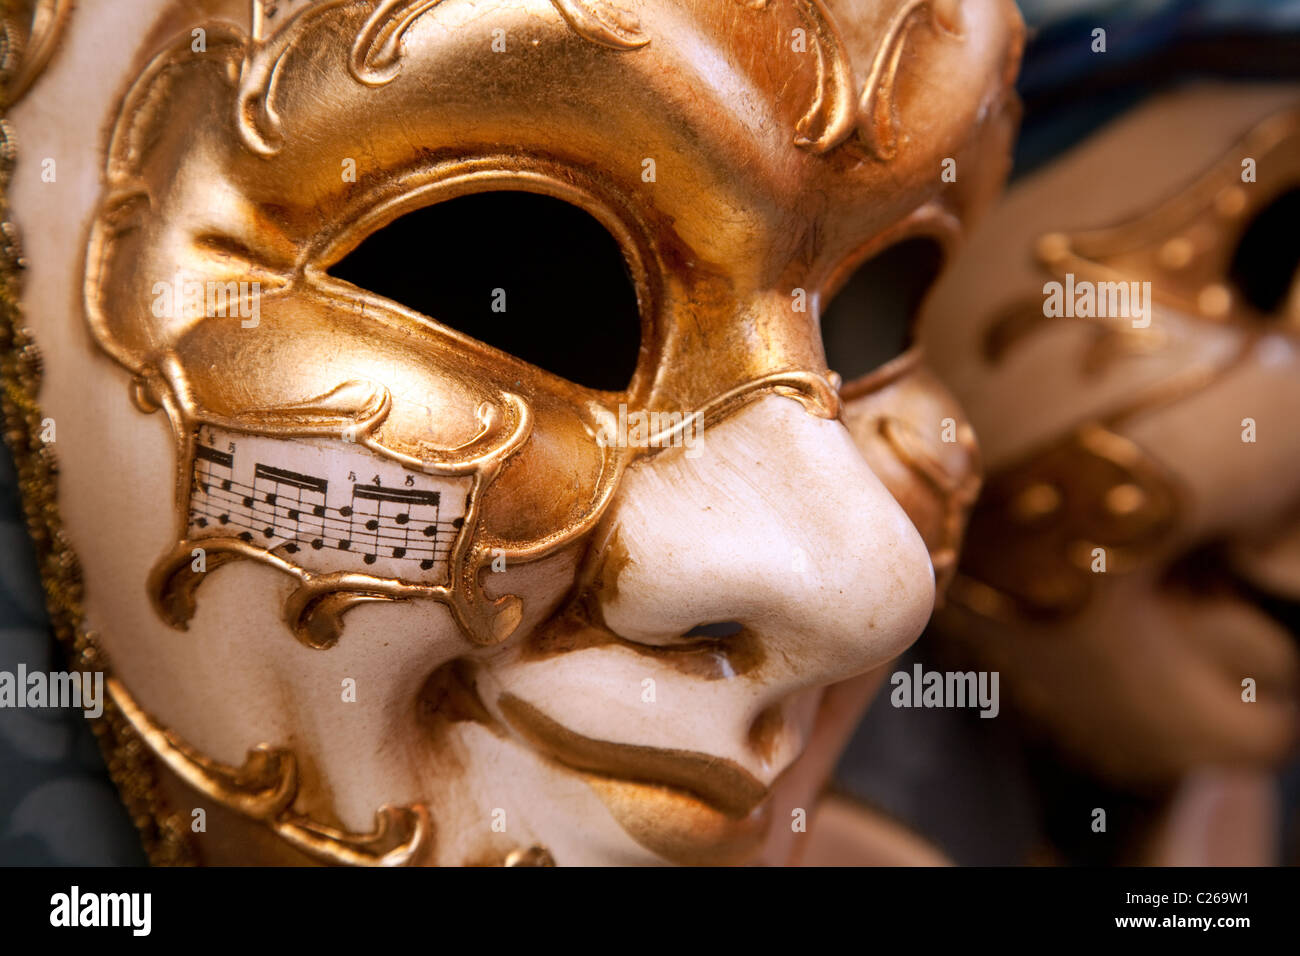 Carnival masks, venice, italy Stock Vector Images - Alamy